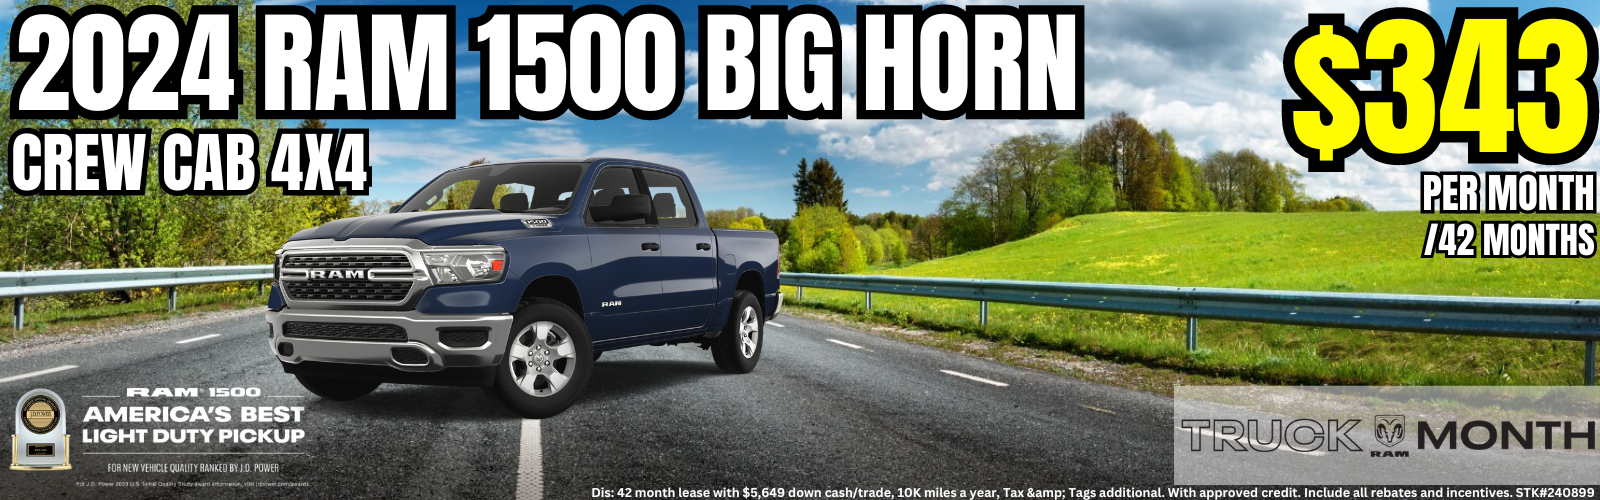 Ram 1500 Big Horn Lease Special